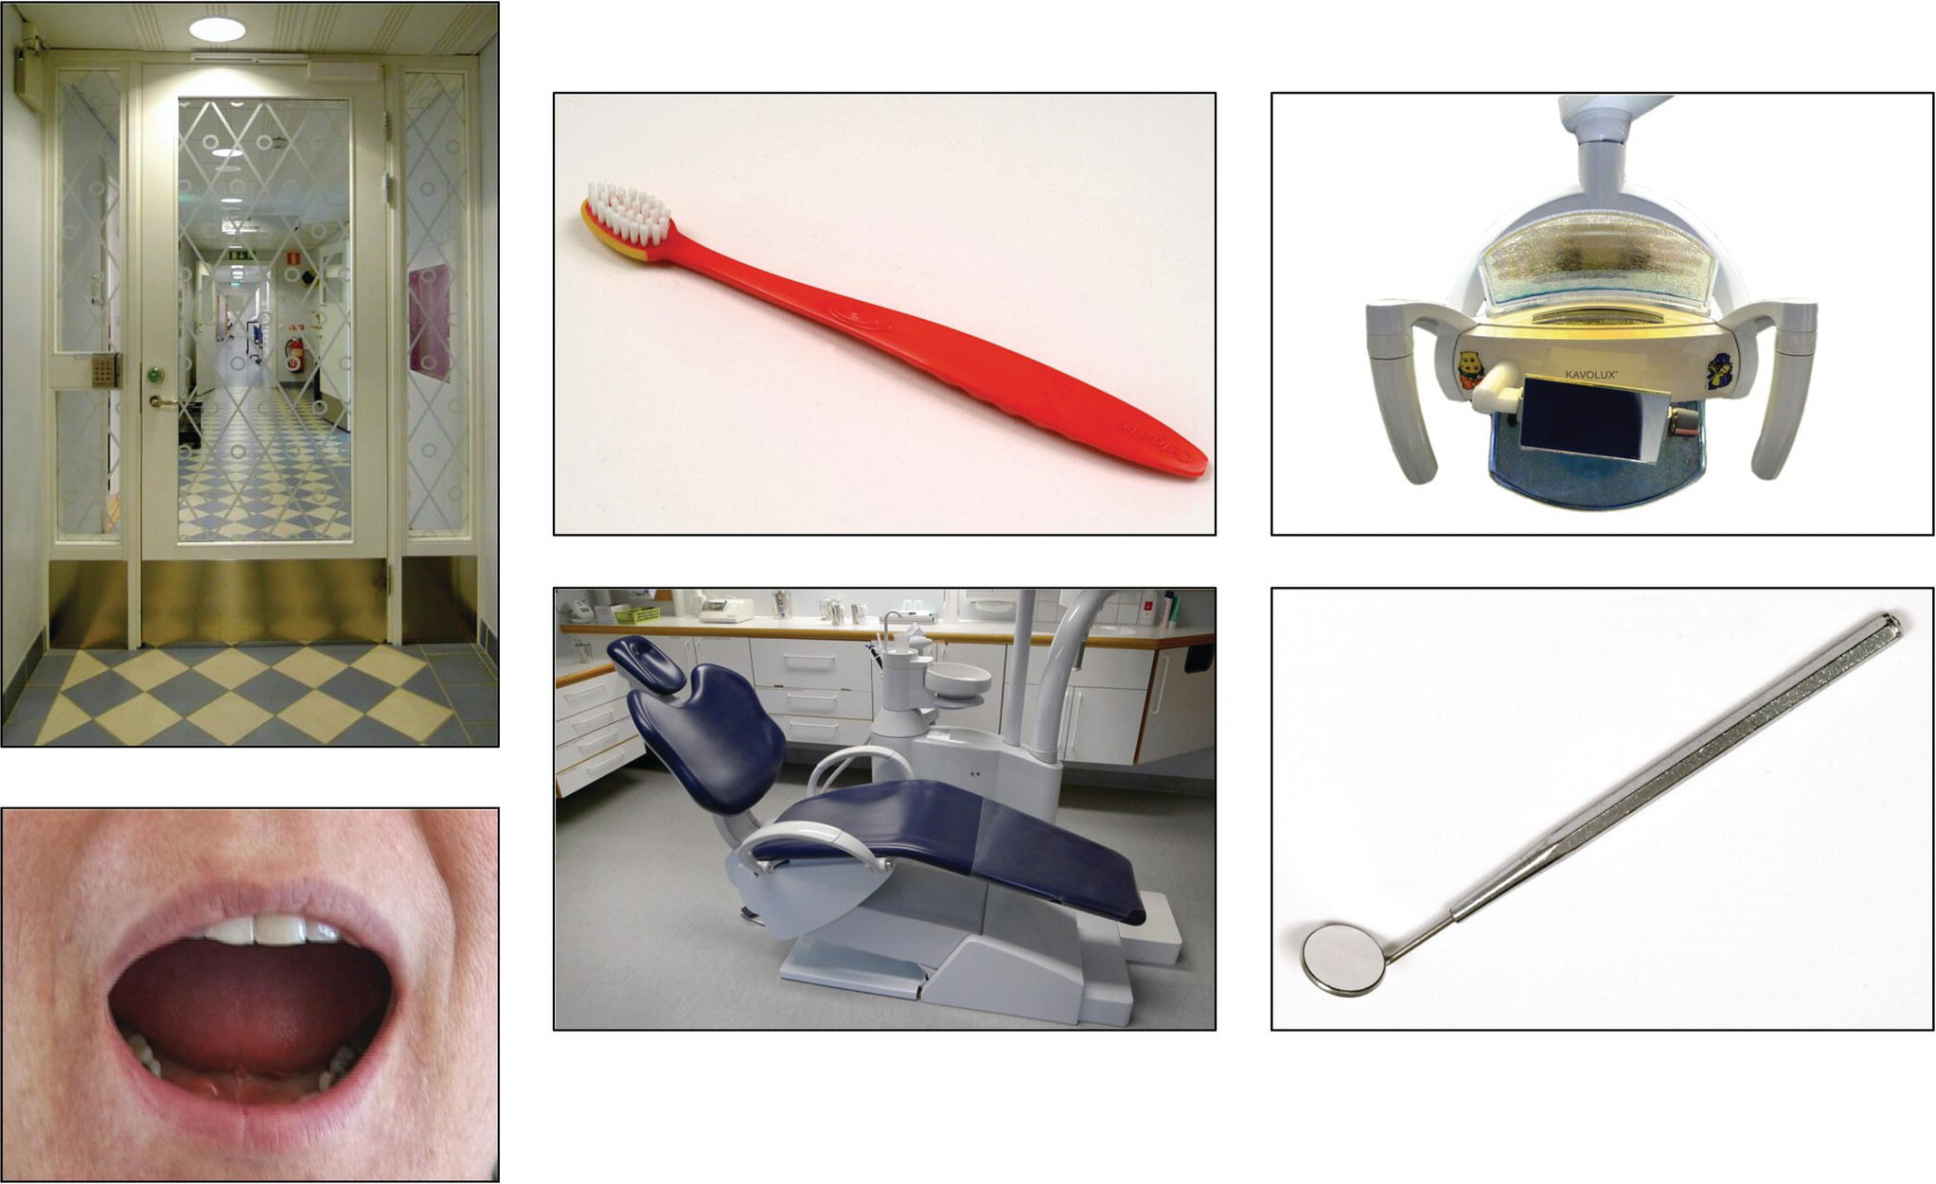 Clockwise: Photos of the entrance, a toothbrush, the operatory light, a mirror, the dental chair, and an open mouth (symbolizing “open your mouth”).